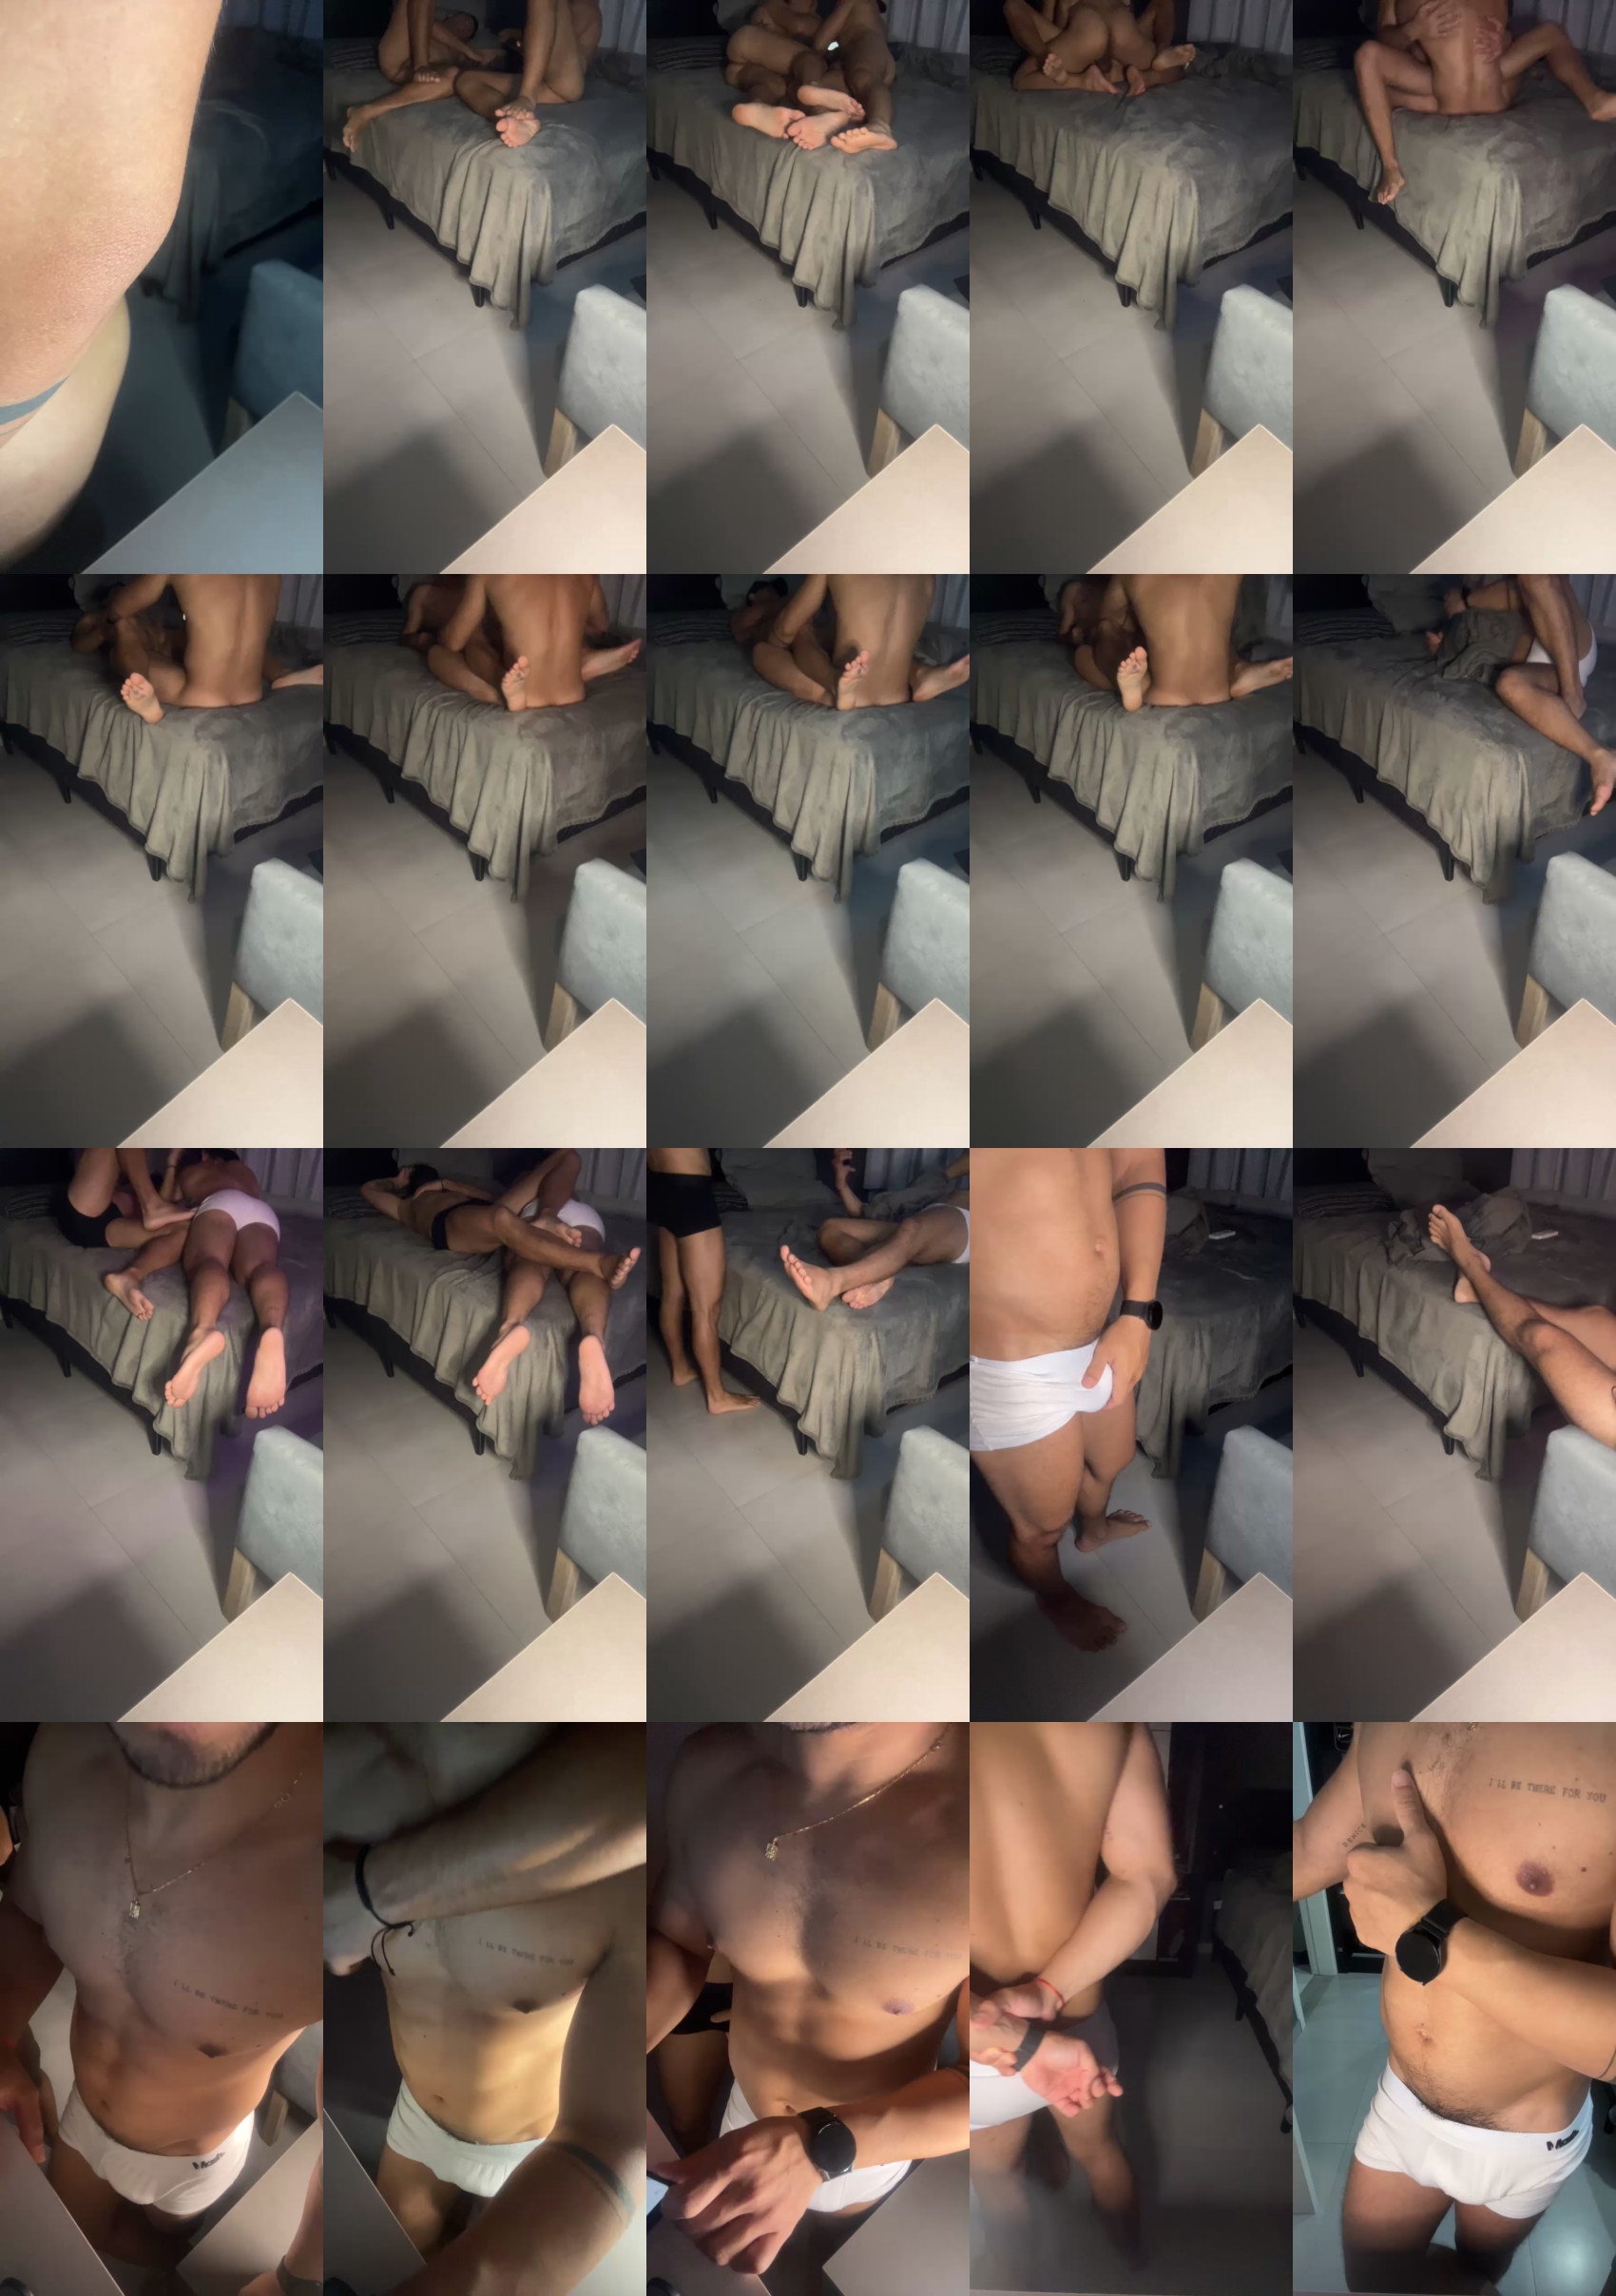 julianohot69 03-12-2023 Recorded Video orgasm